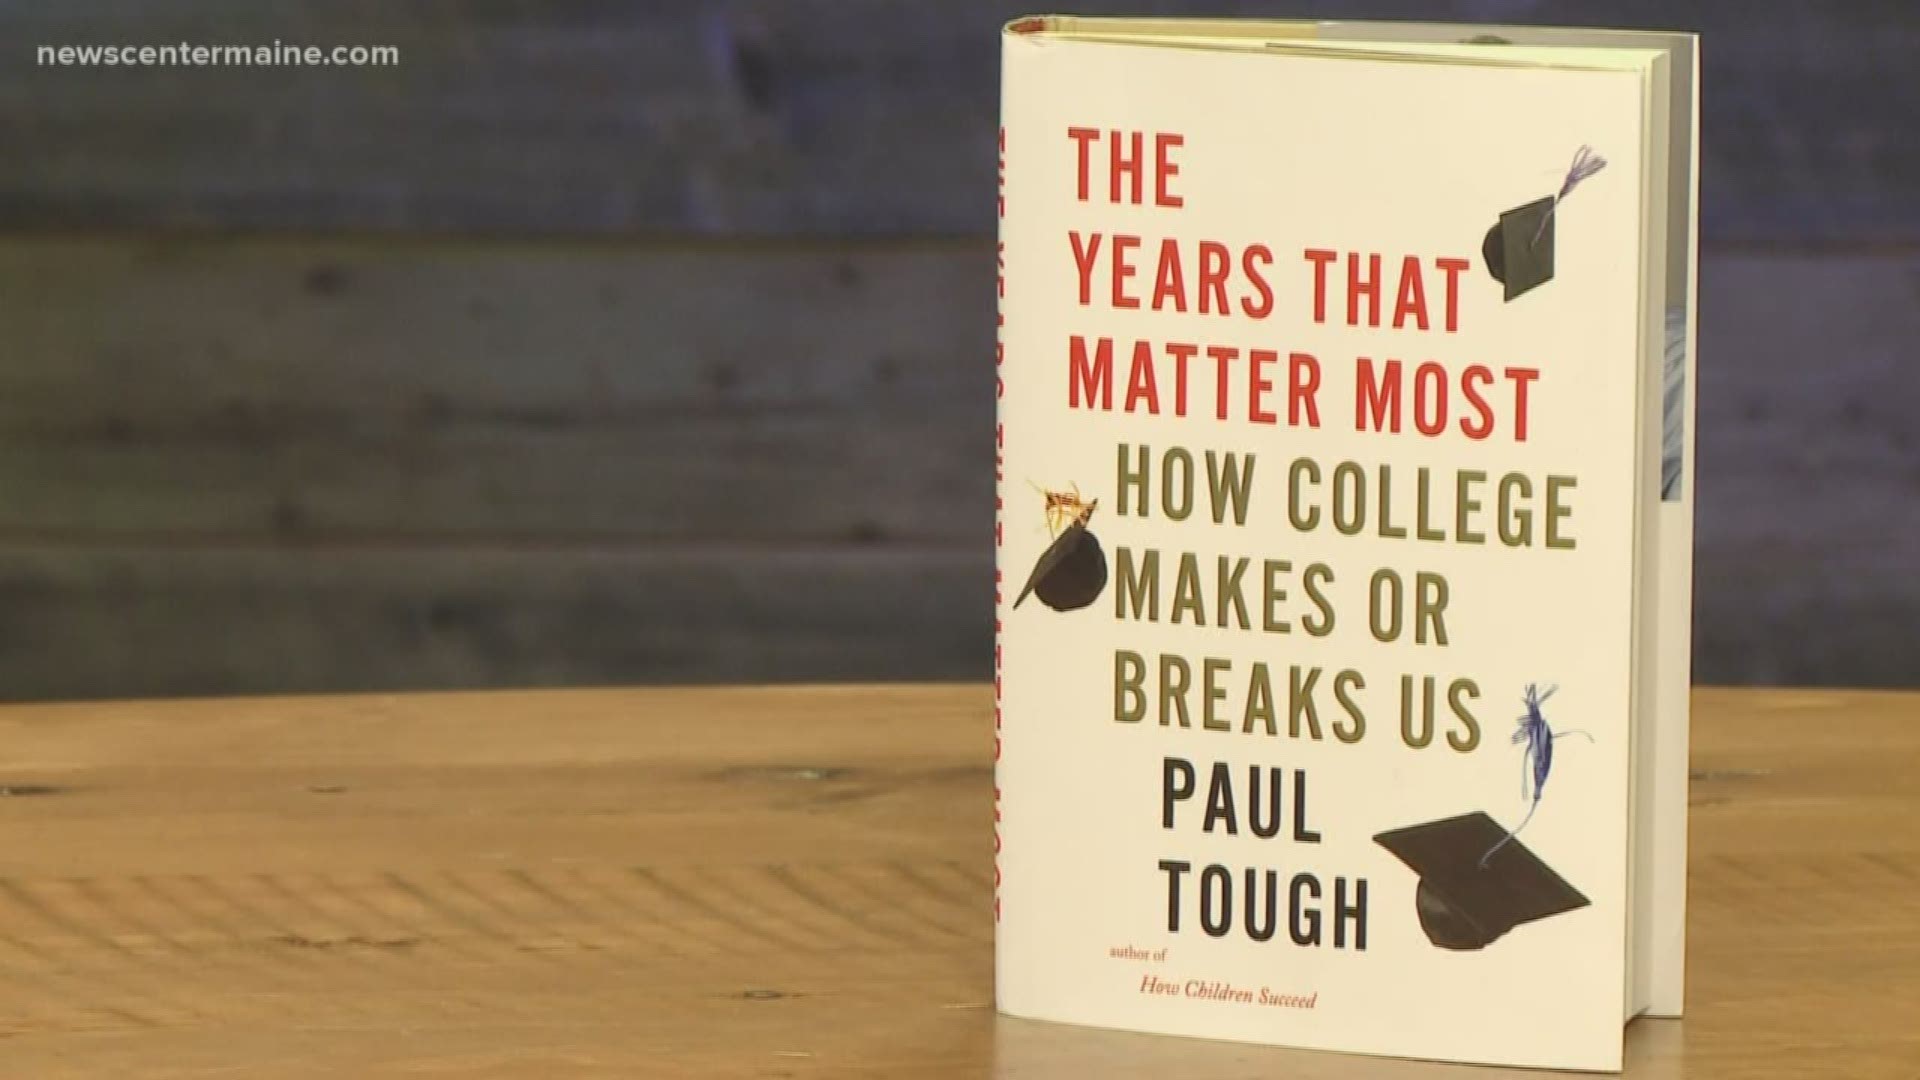 Author Paul Tough explores higher education, and whether it really is for everyone.